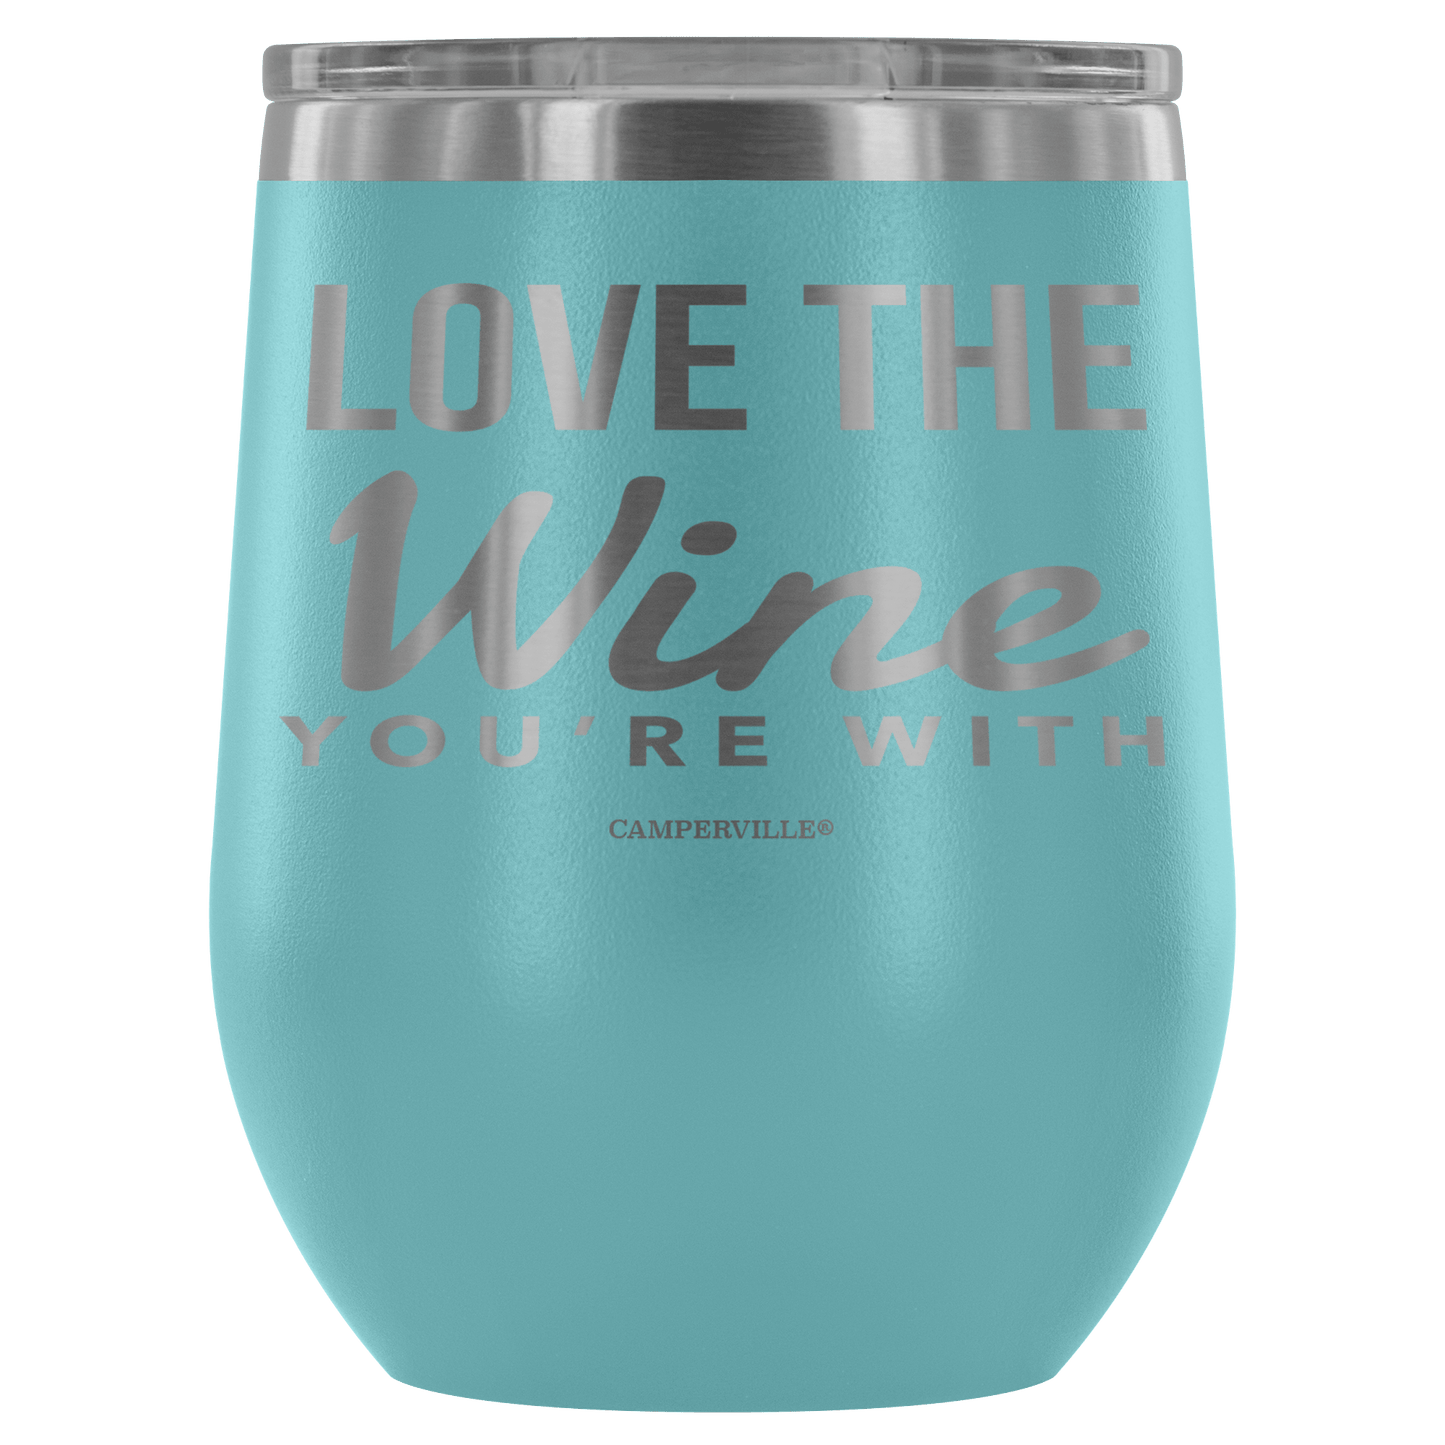 "Love The Wine You're With" - Stemless Wine Cup